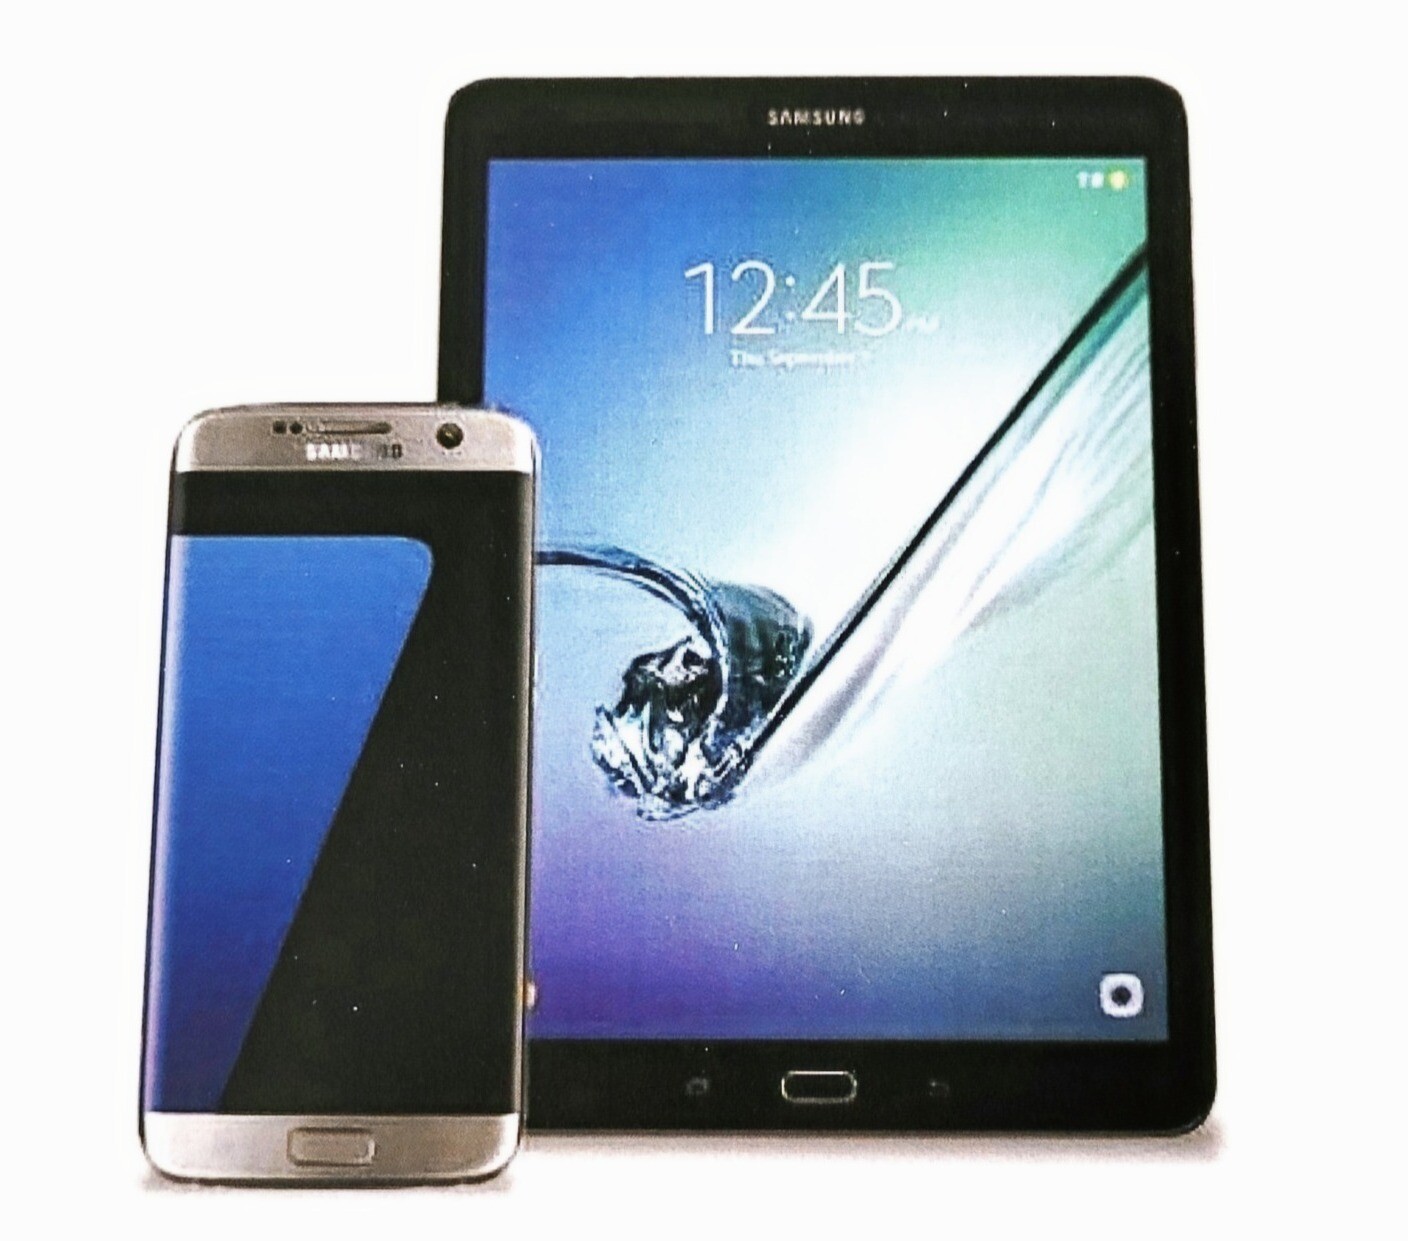 A5 Manual to accompany Samsung tablets &/or smartphones